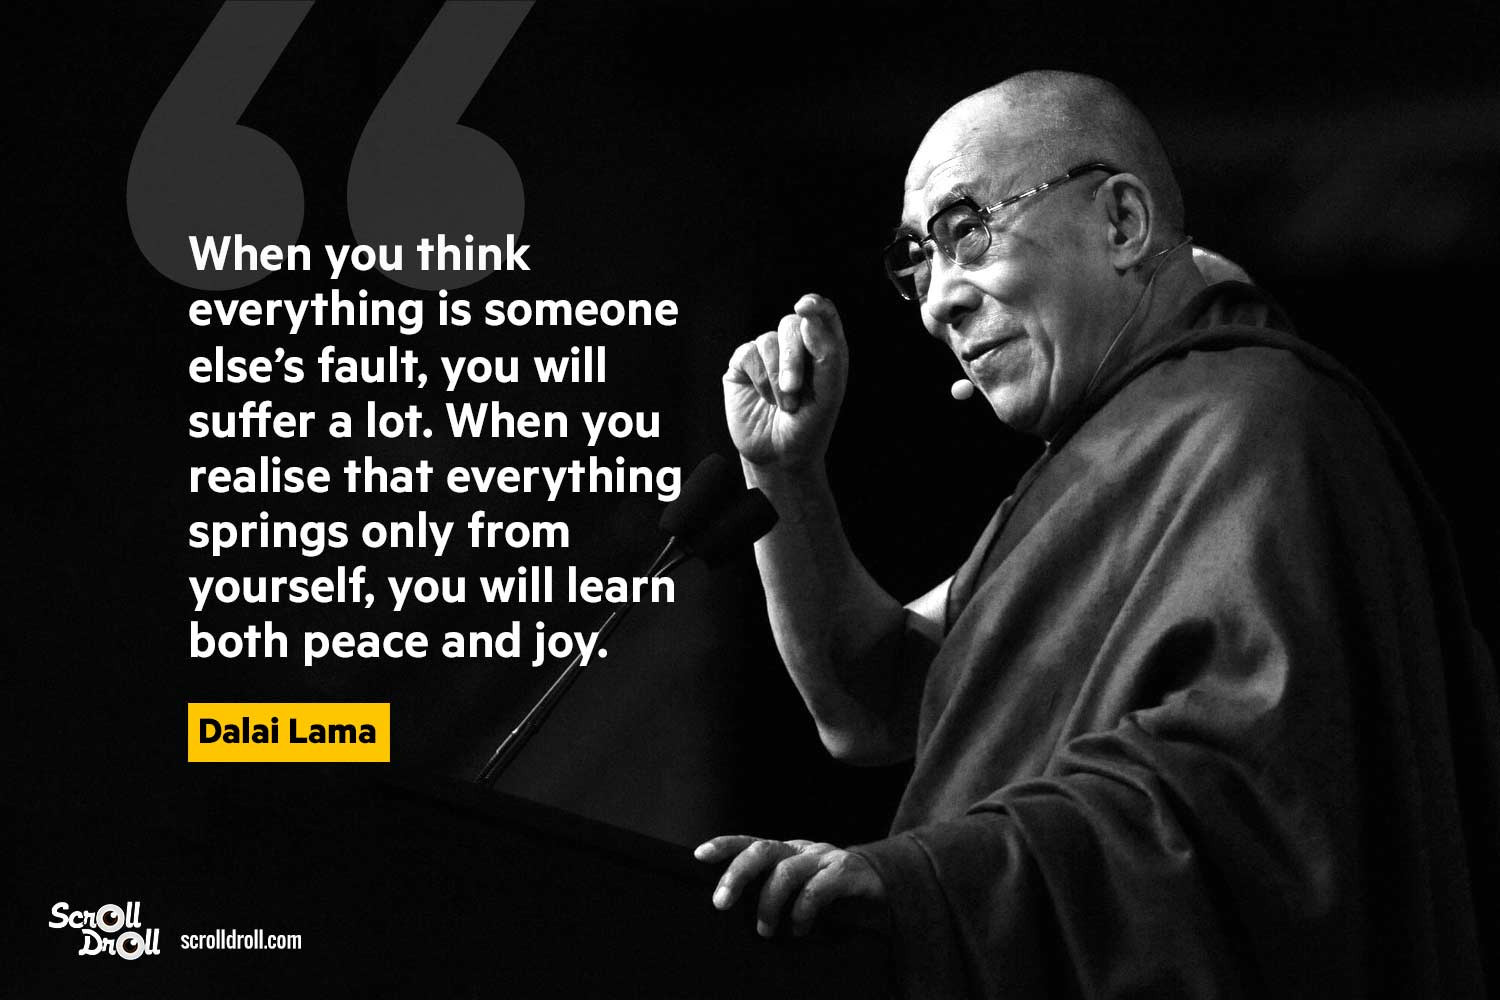 Kindness Quotes Dalai Lama
 The Best Ideas for Kindness Quotes Dalai Lama Home